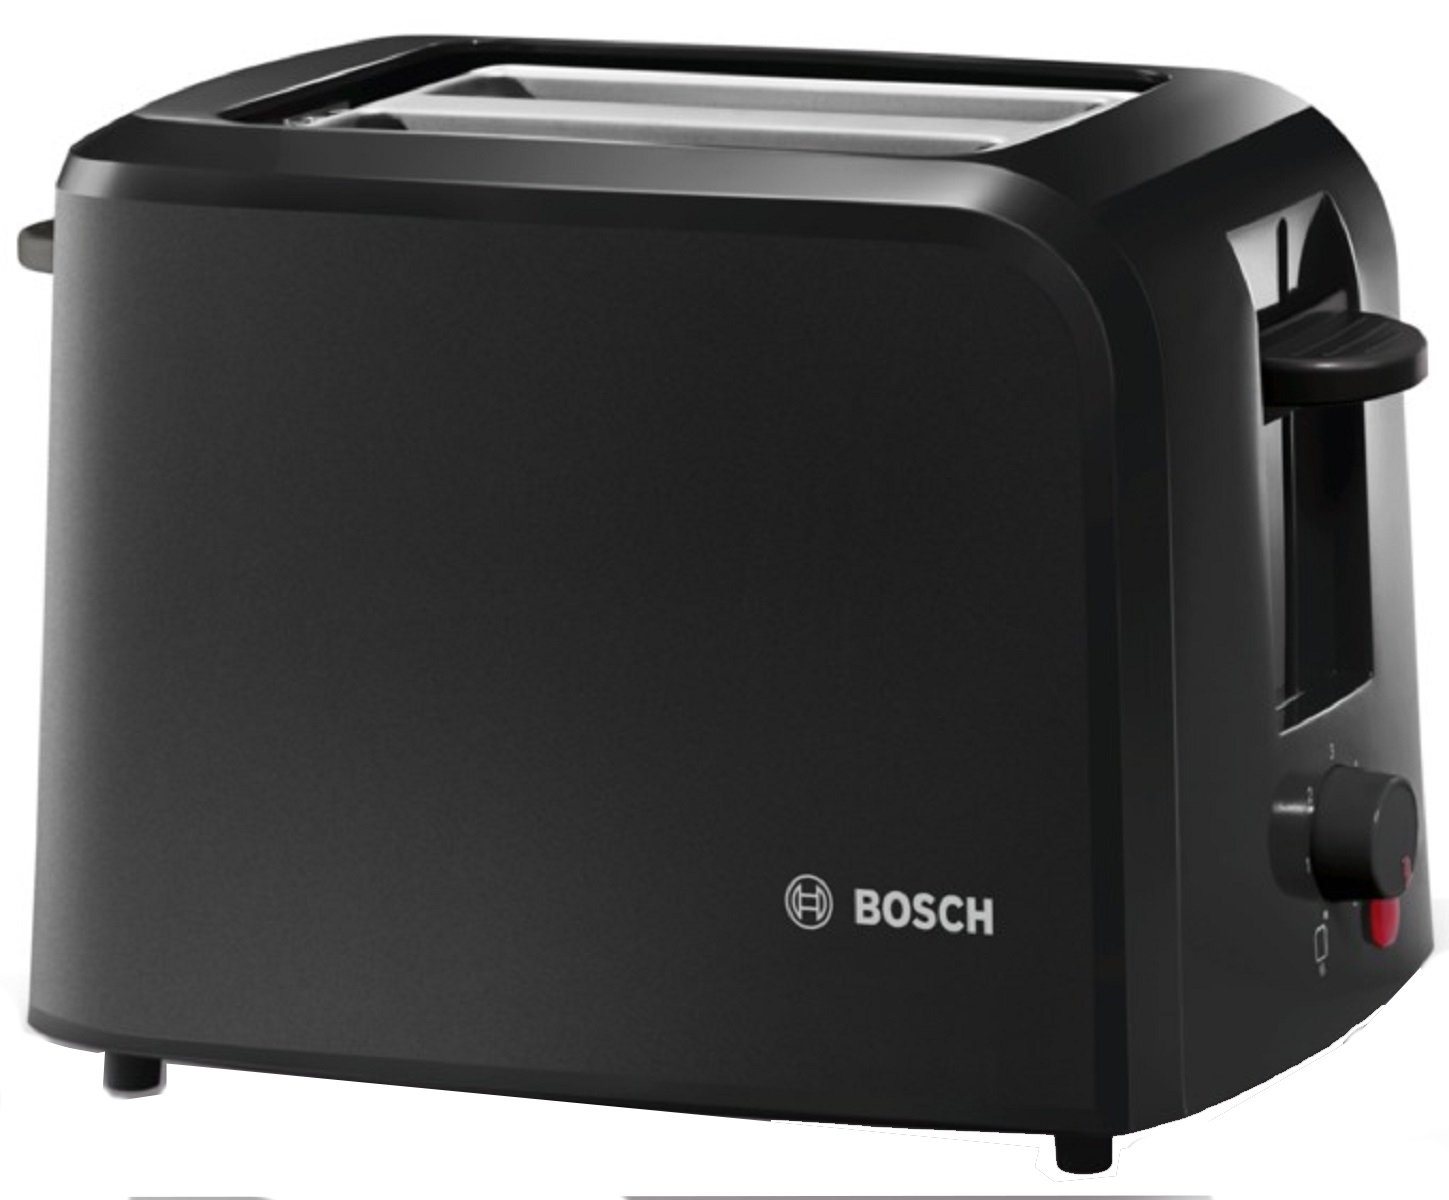 Bosch TAT3A011GB   WHITE 2 Slice Compact Toaster  Large Slot High Lift 